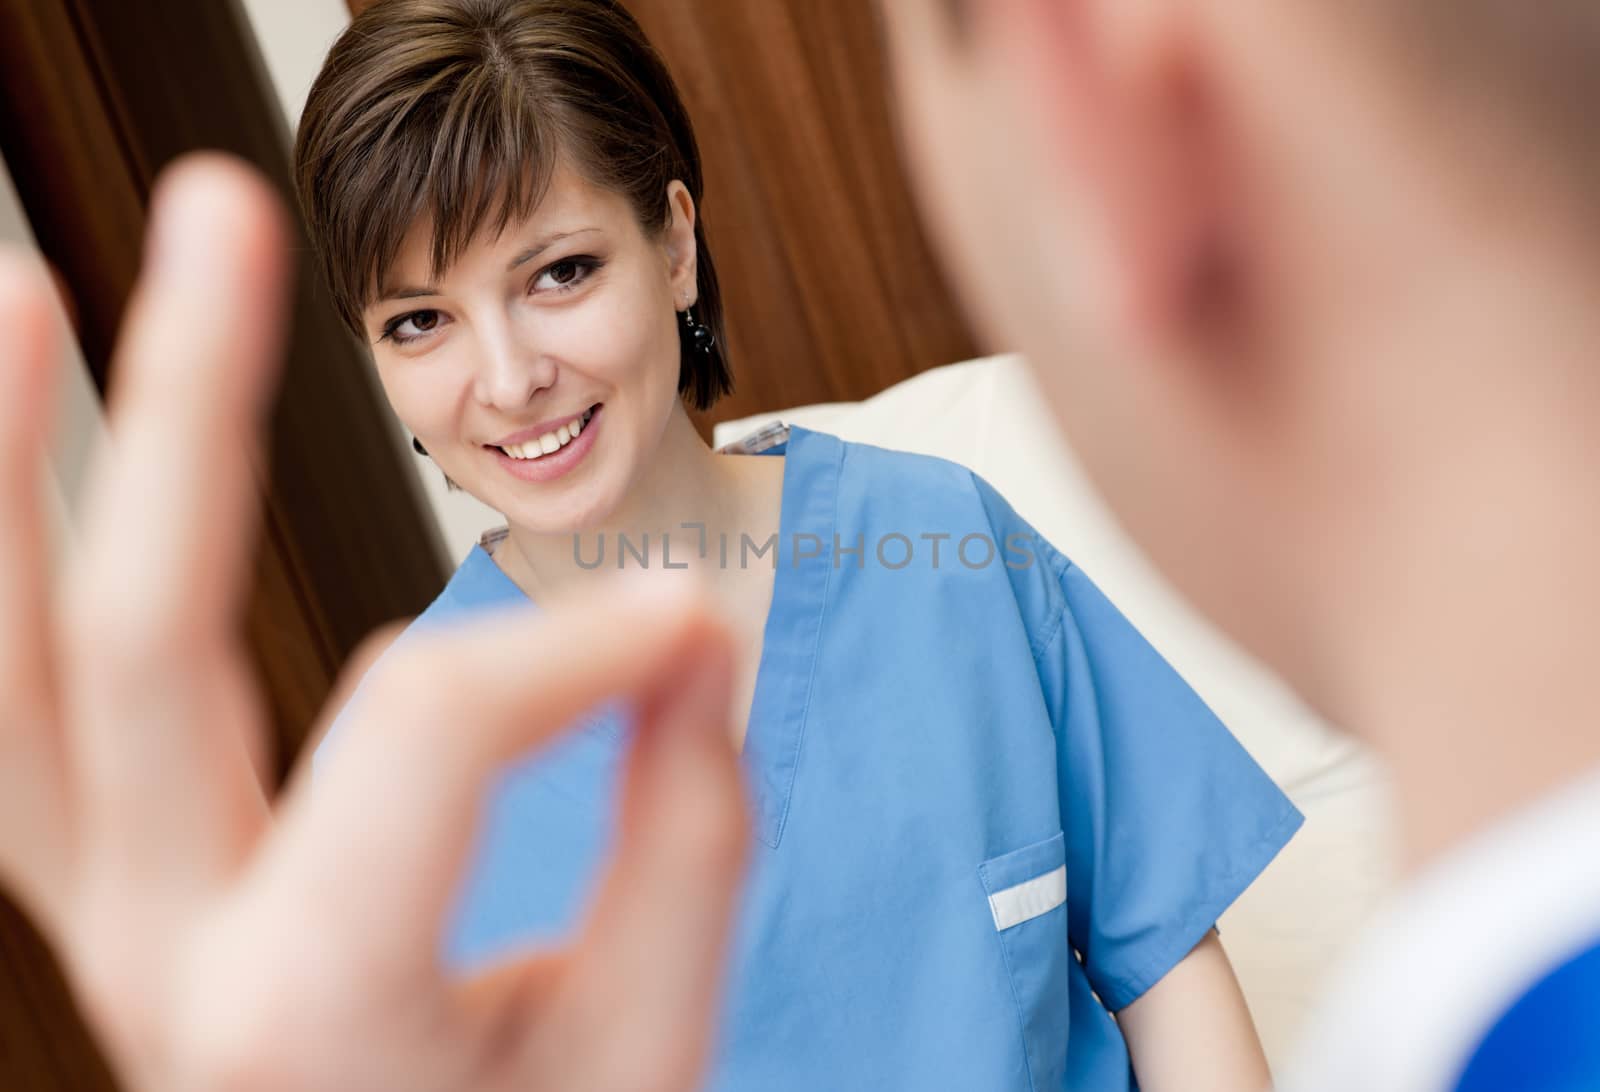 Doctor's hand showing okay gesture to healed female patient, focus on woman